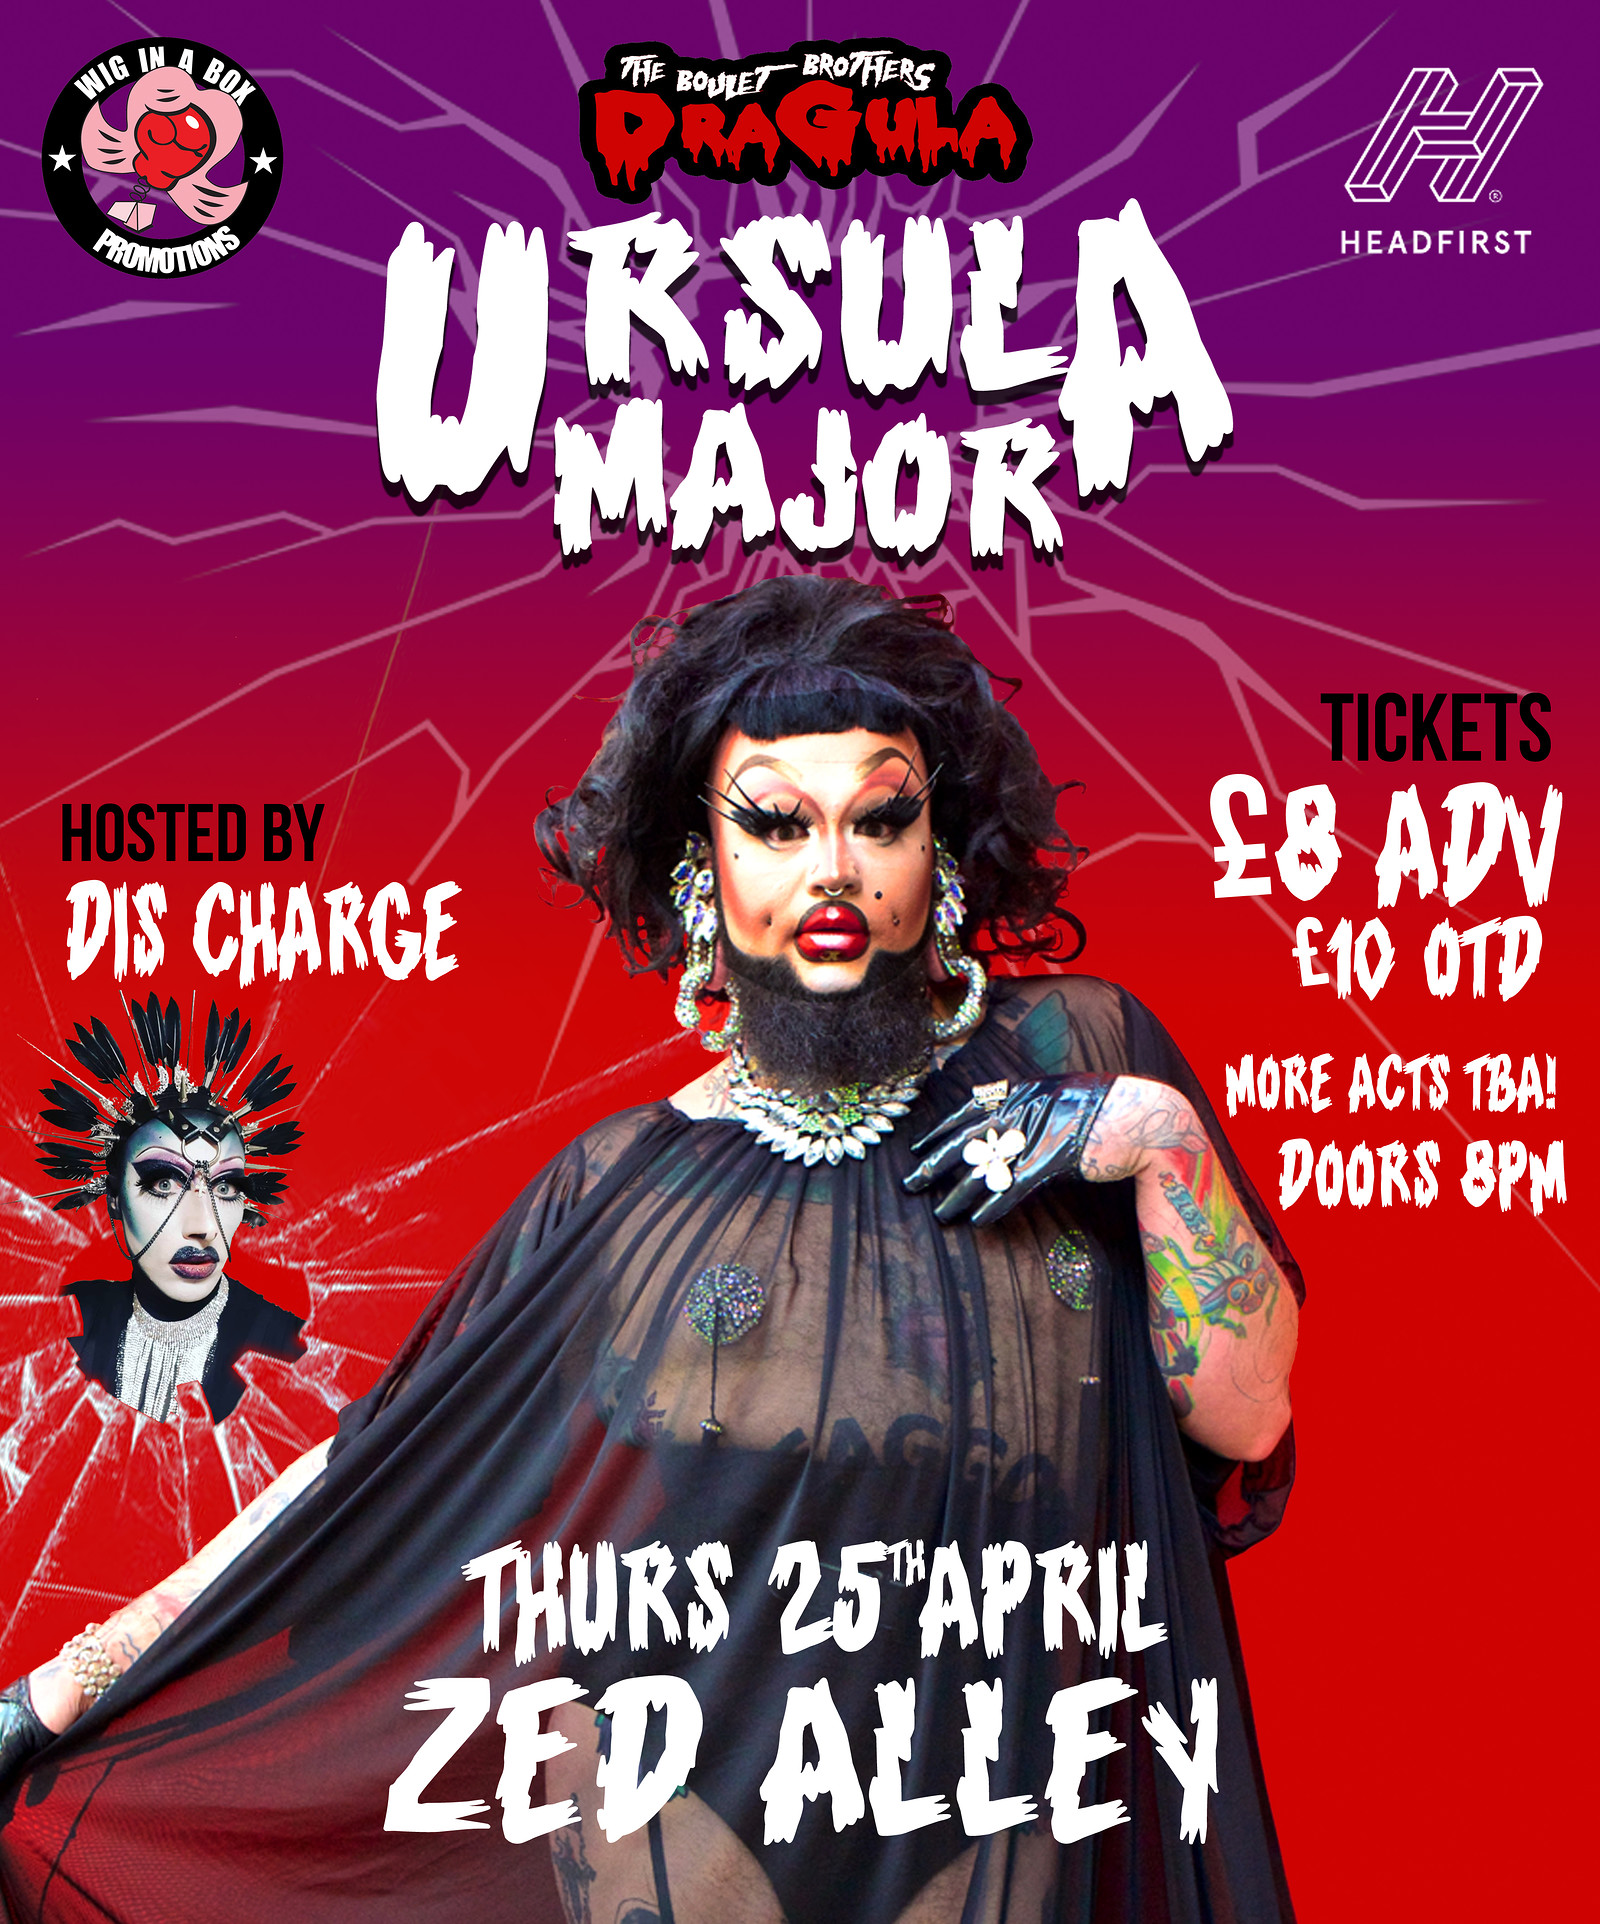 Wig in a Box Promotions present Ursula Major at Zed Alley